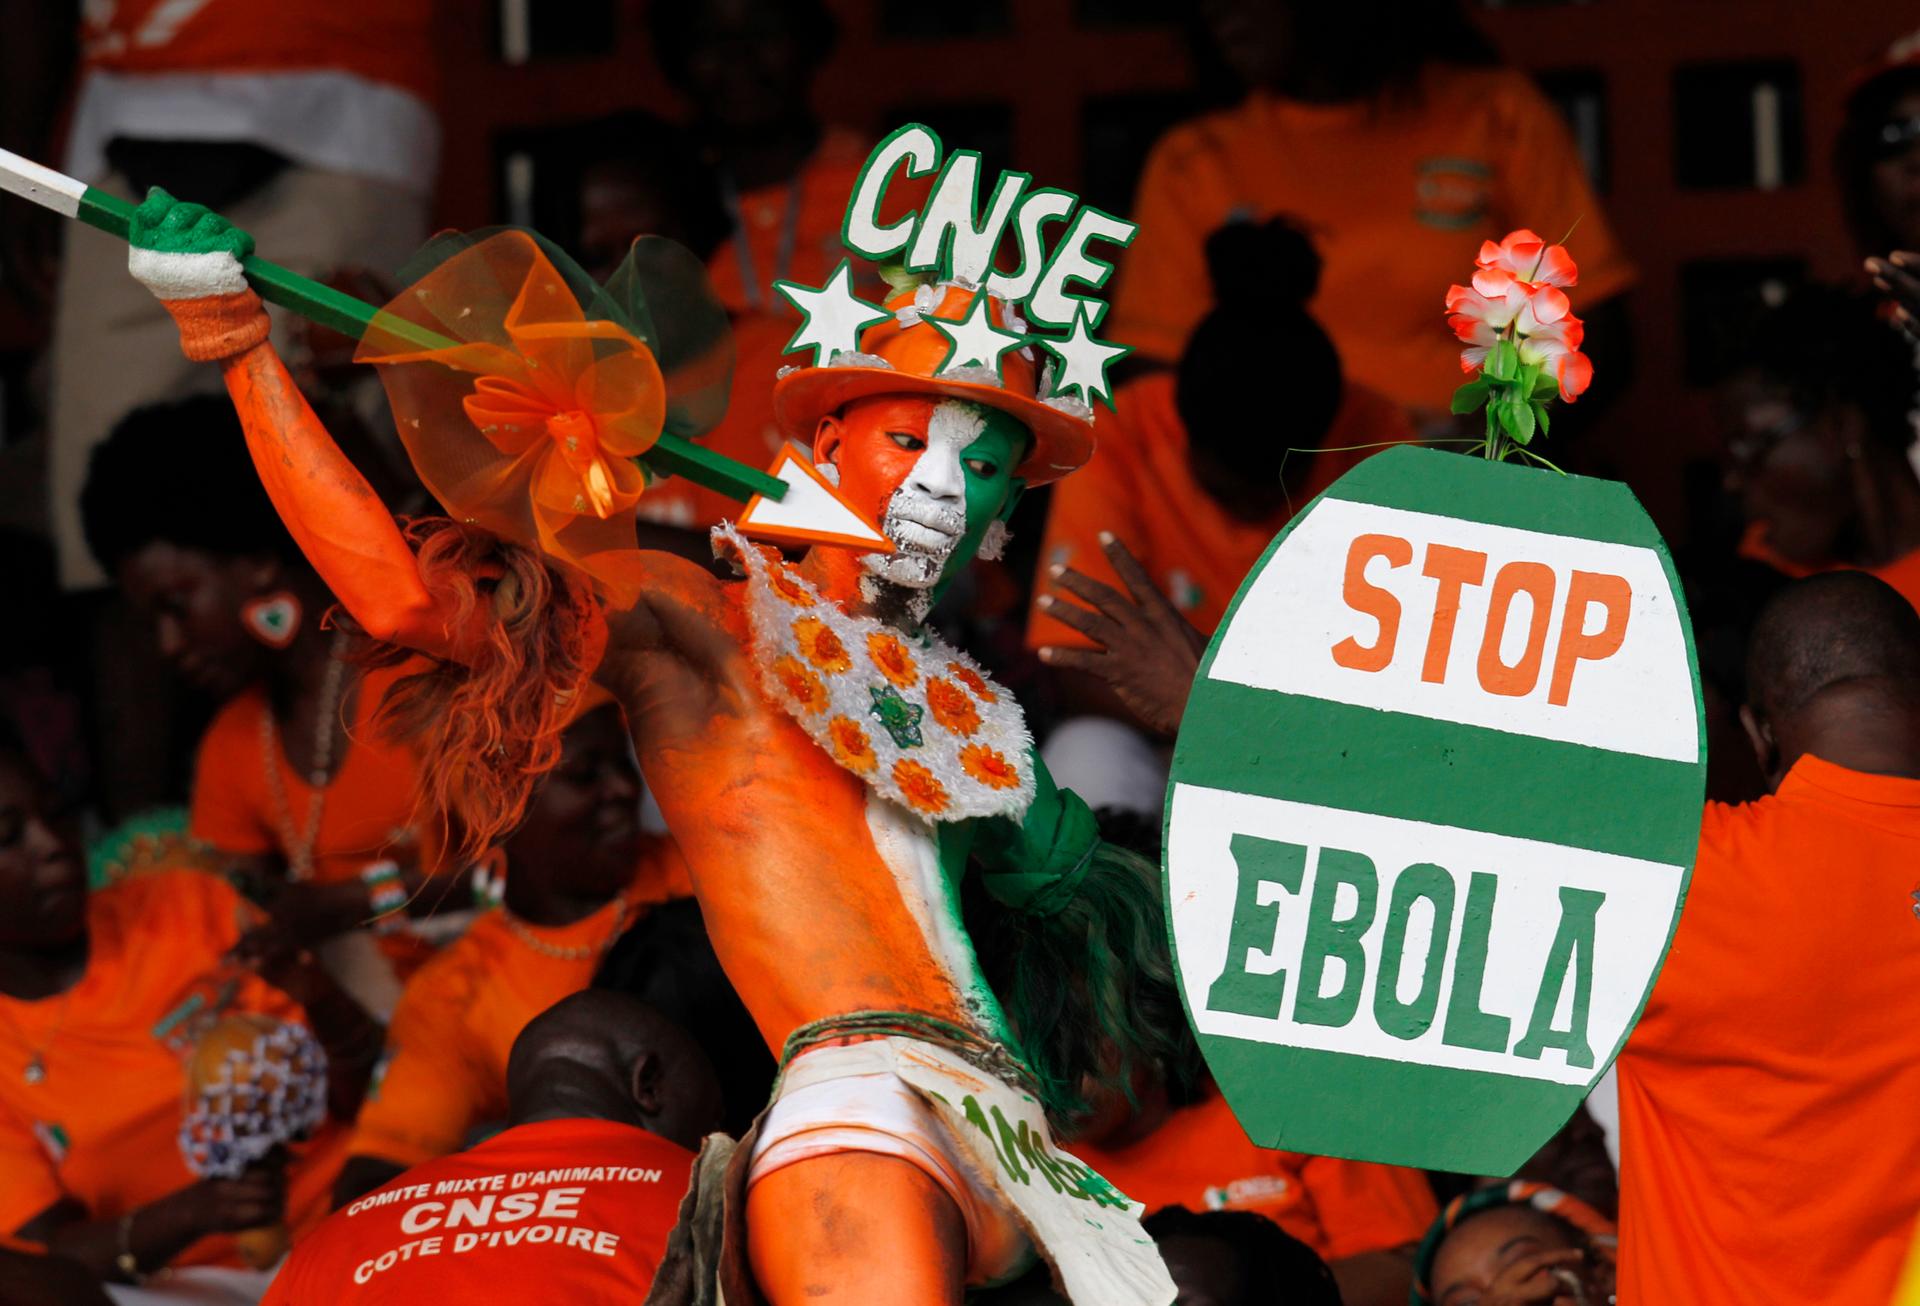 A fan of Ivory coast holds a sign with a message against Ebola during the 2015 African Nations Cup qualifying soccer match between Ivory Coast and Sierra Leone.